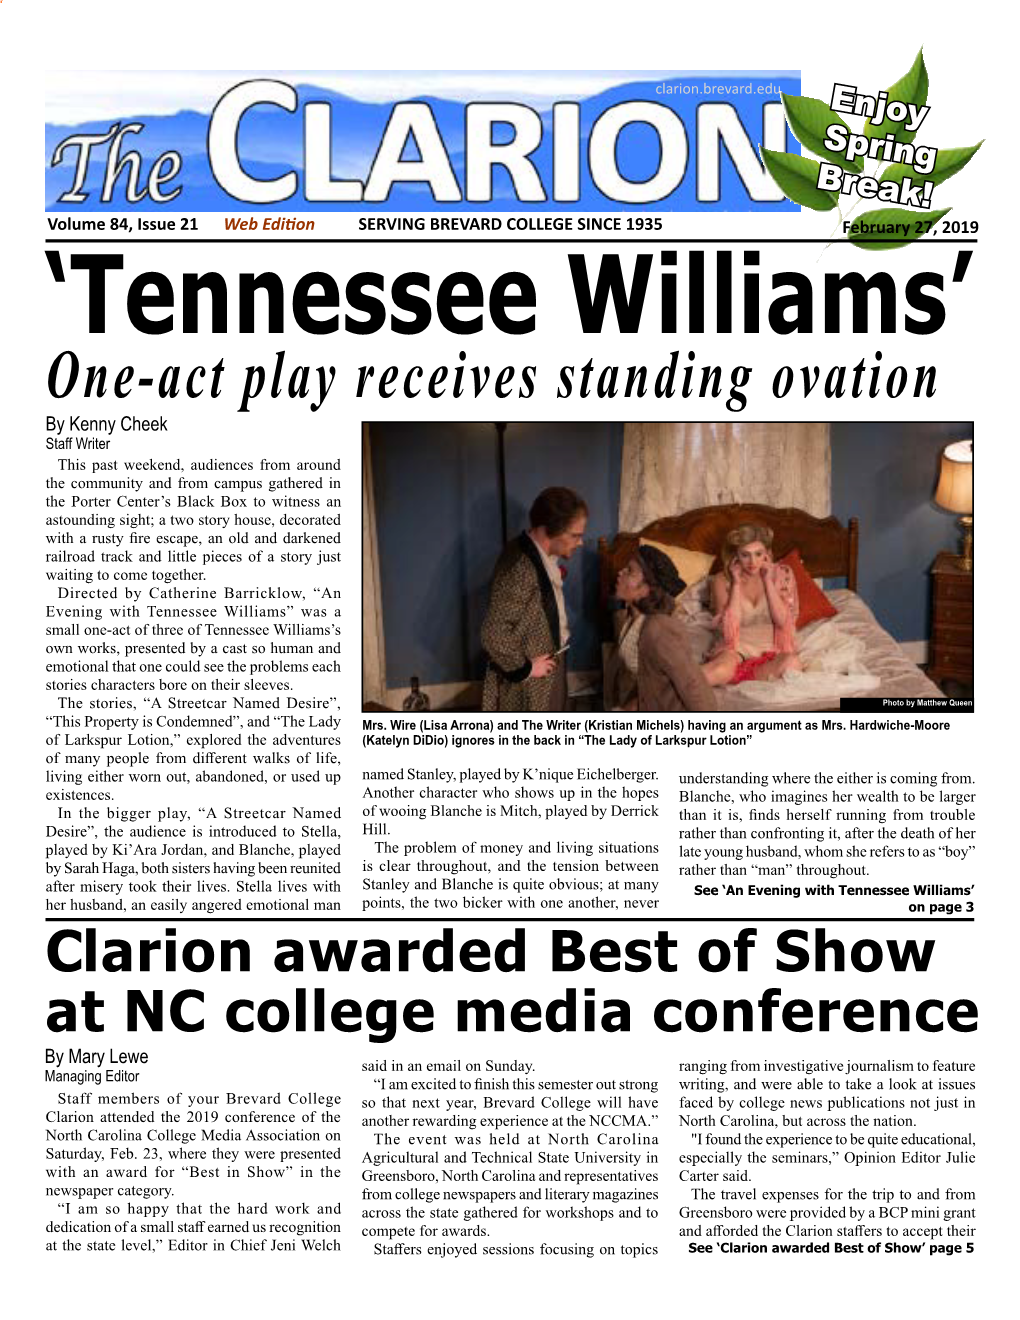 The Clarion, Vol. 84, Issue #21, Feb. 27, 2019